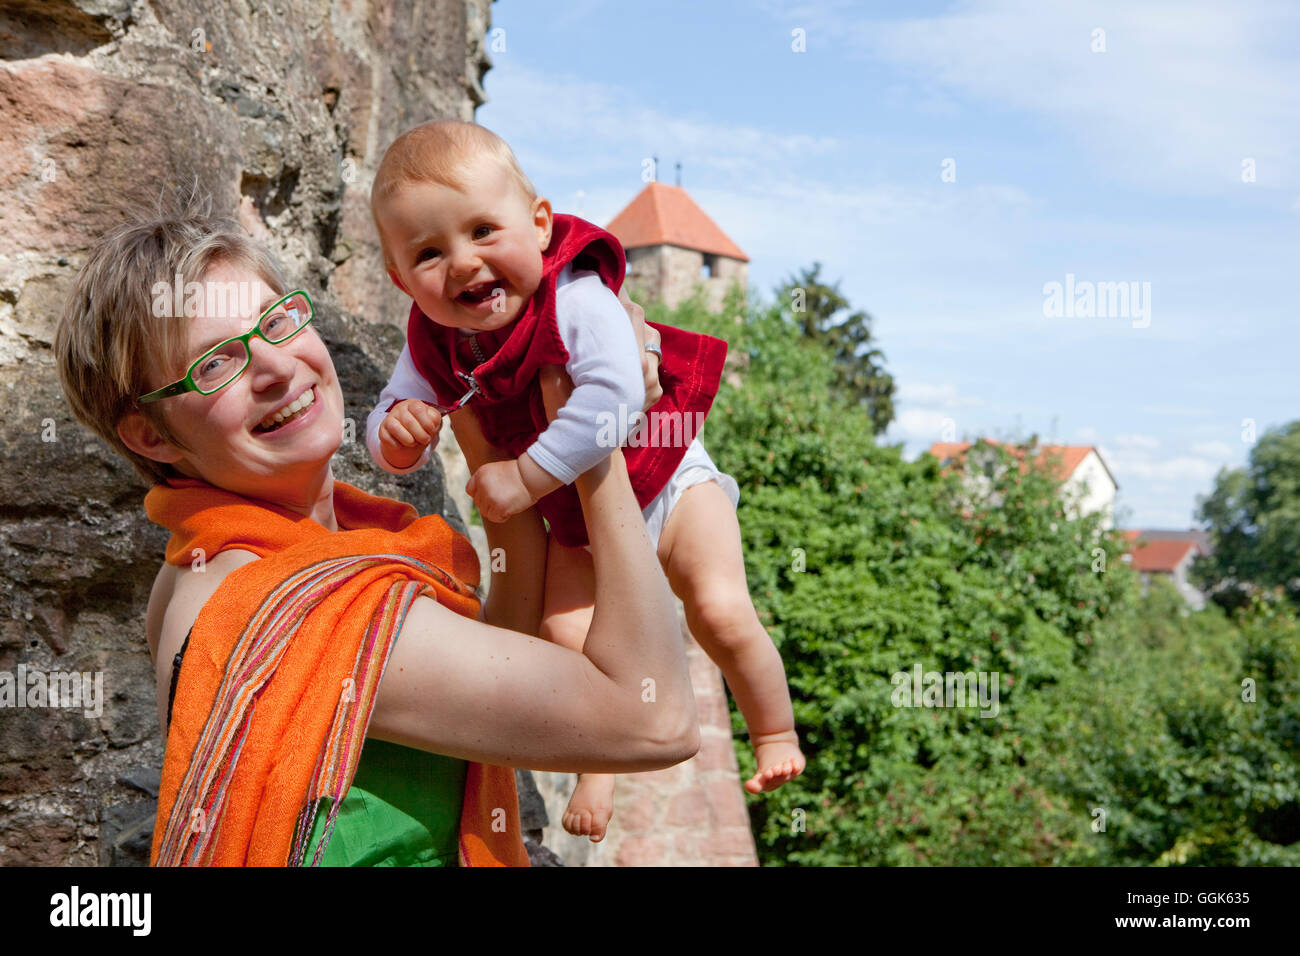 Young smiling woman lifting her laughing baby at the Fritzlar city wall, Fritzlar, Hesse, Germany, Europe Stock Photo